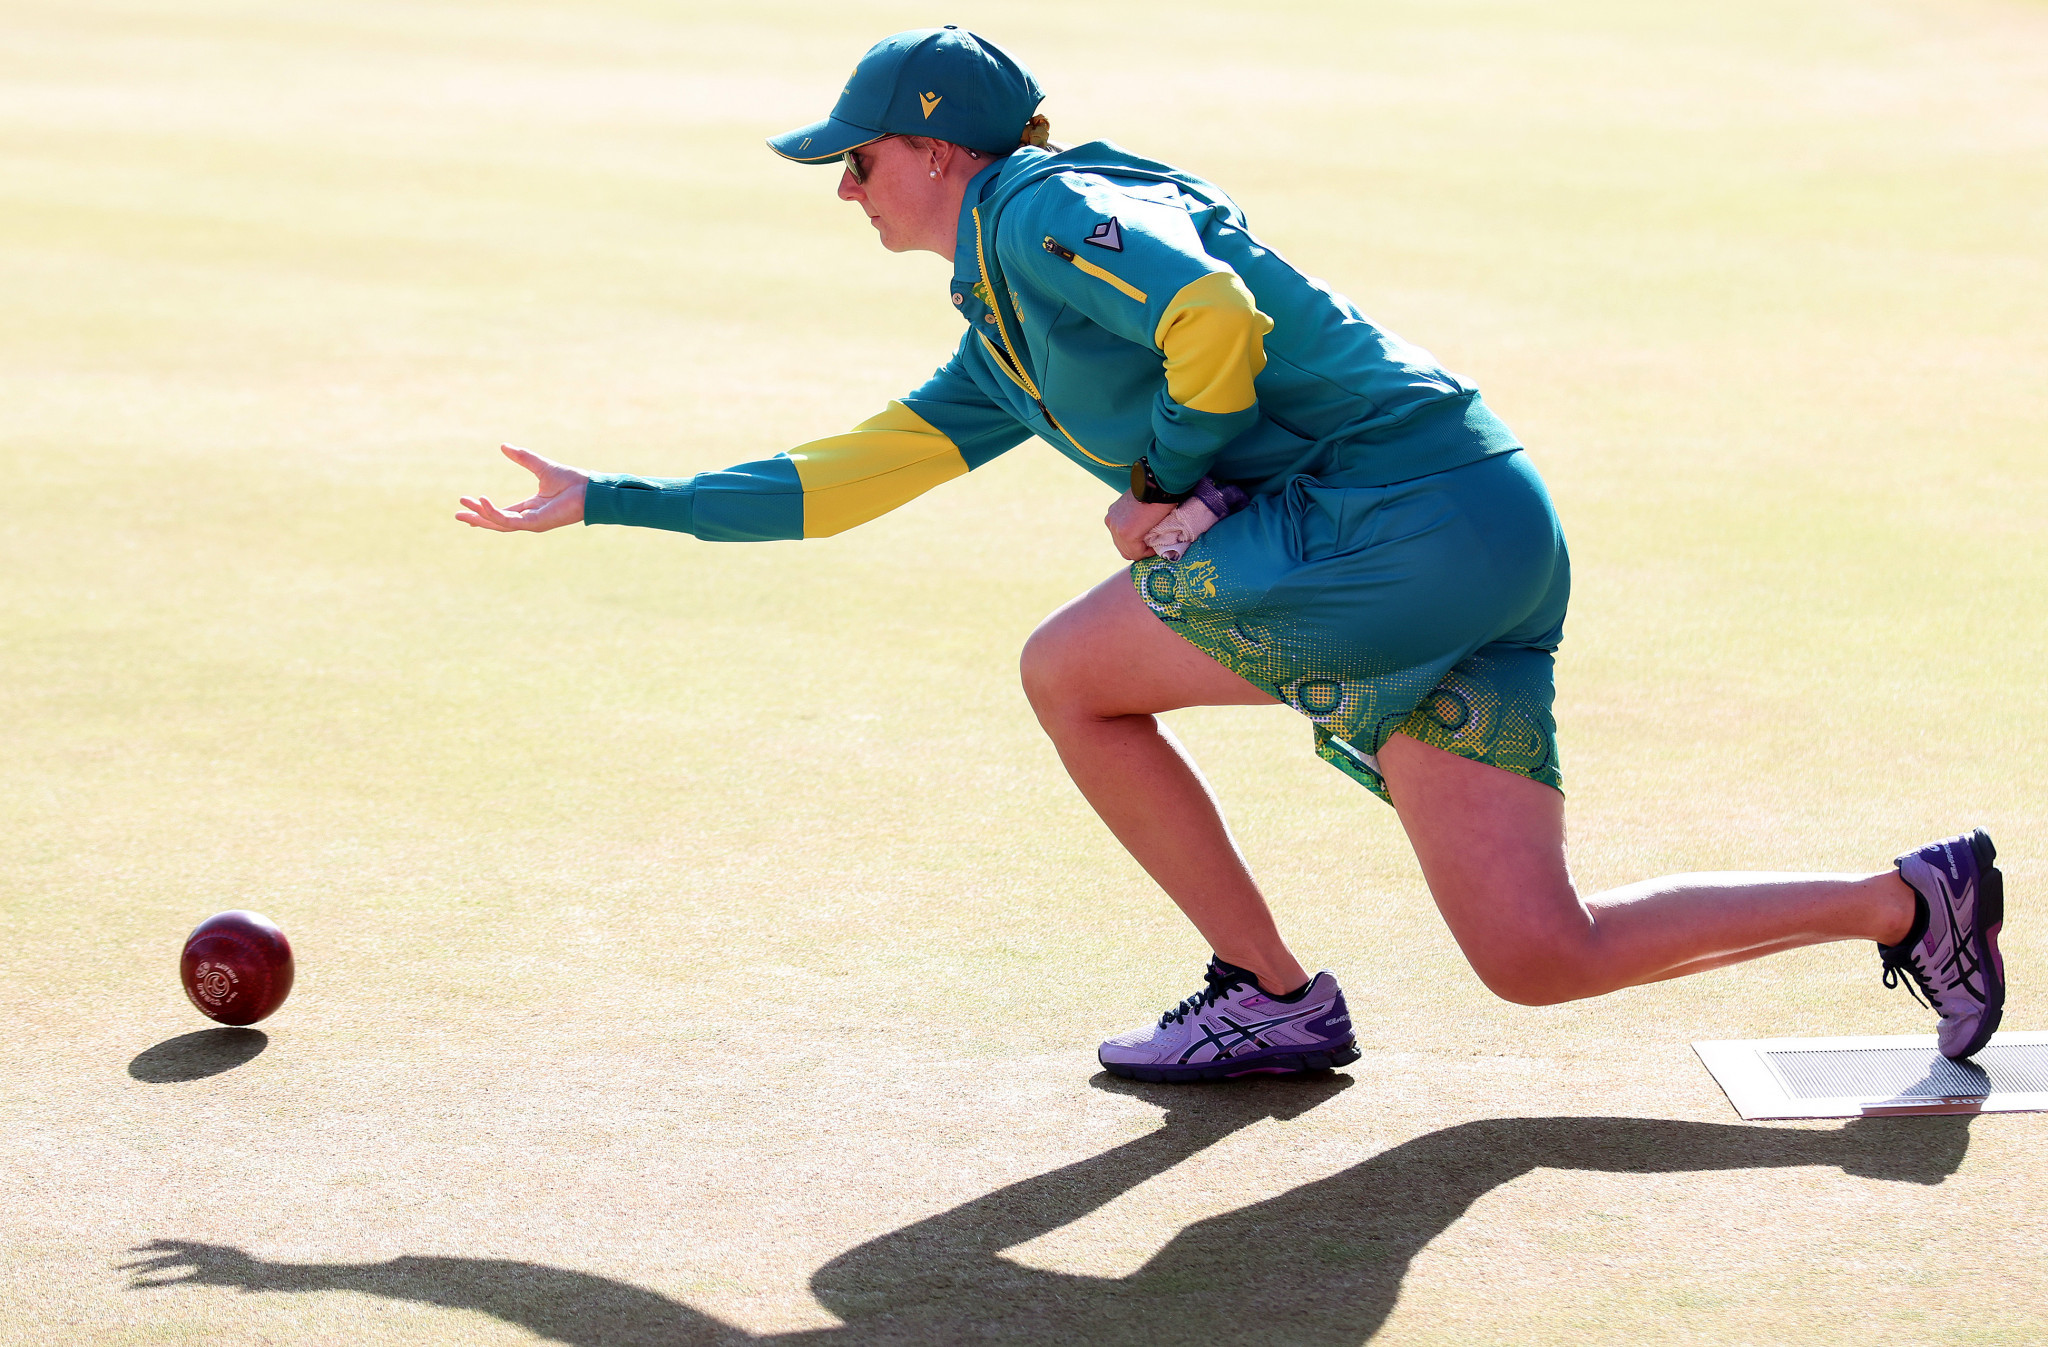 Australia claimed the women's pairs title in dramatic fashion on the final day of lawn bowls action at the Commonwealth Games ©Getty Images